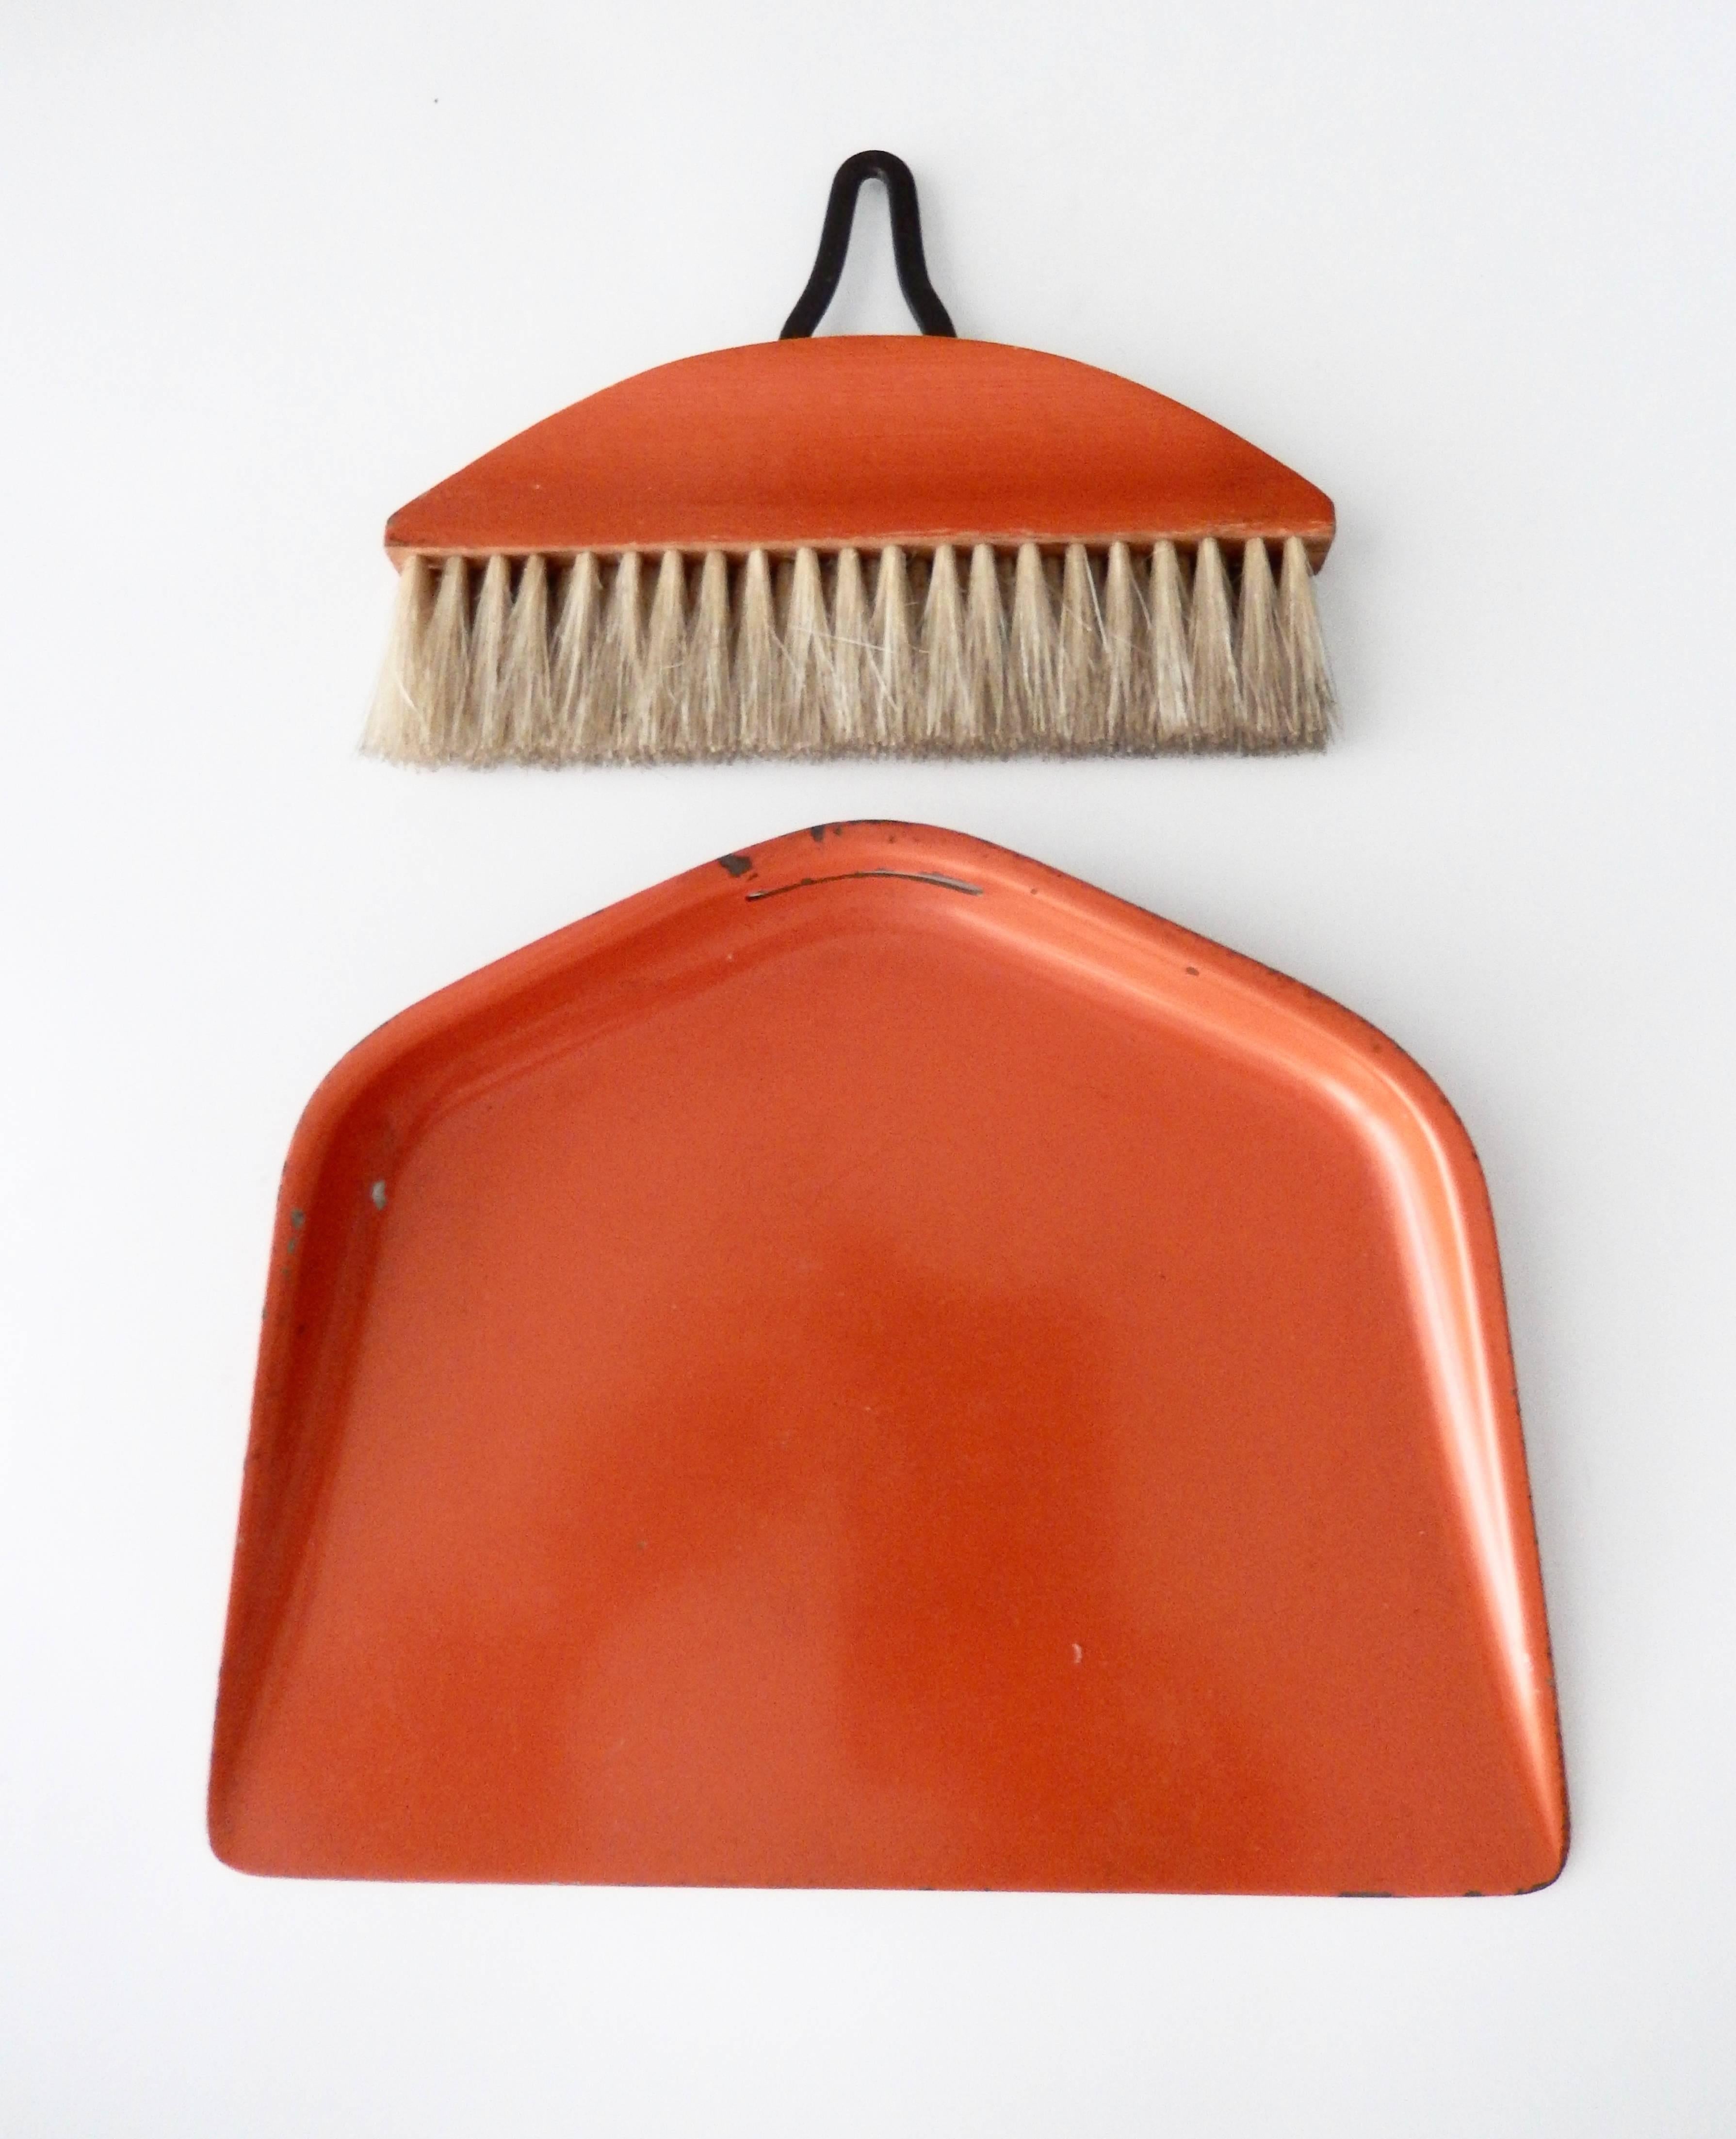 Mid-20th Century Bauhaus/Marianne Brandt Modernist Crumb Brush and Tray, circa 1929 For Sale